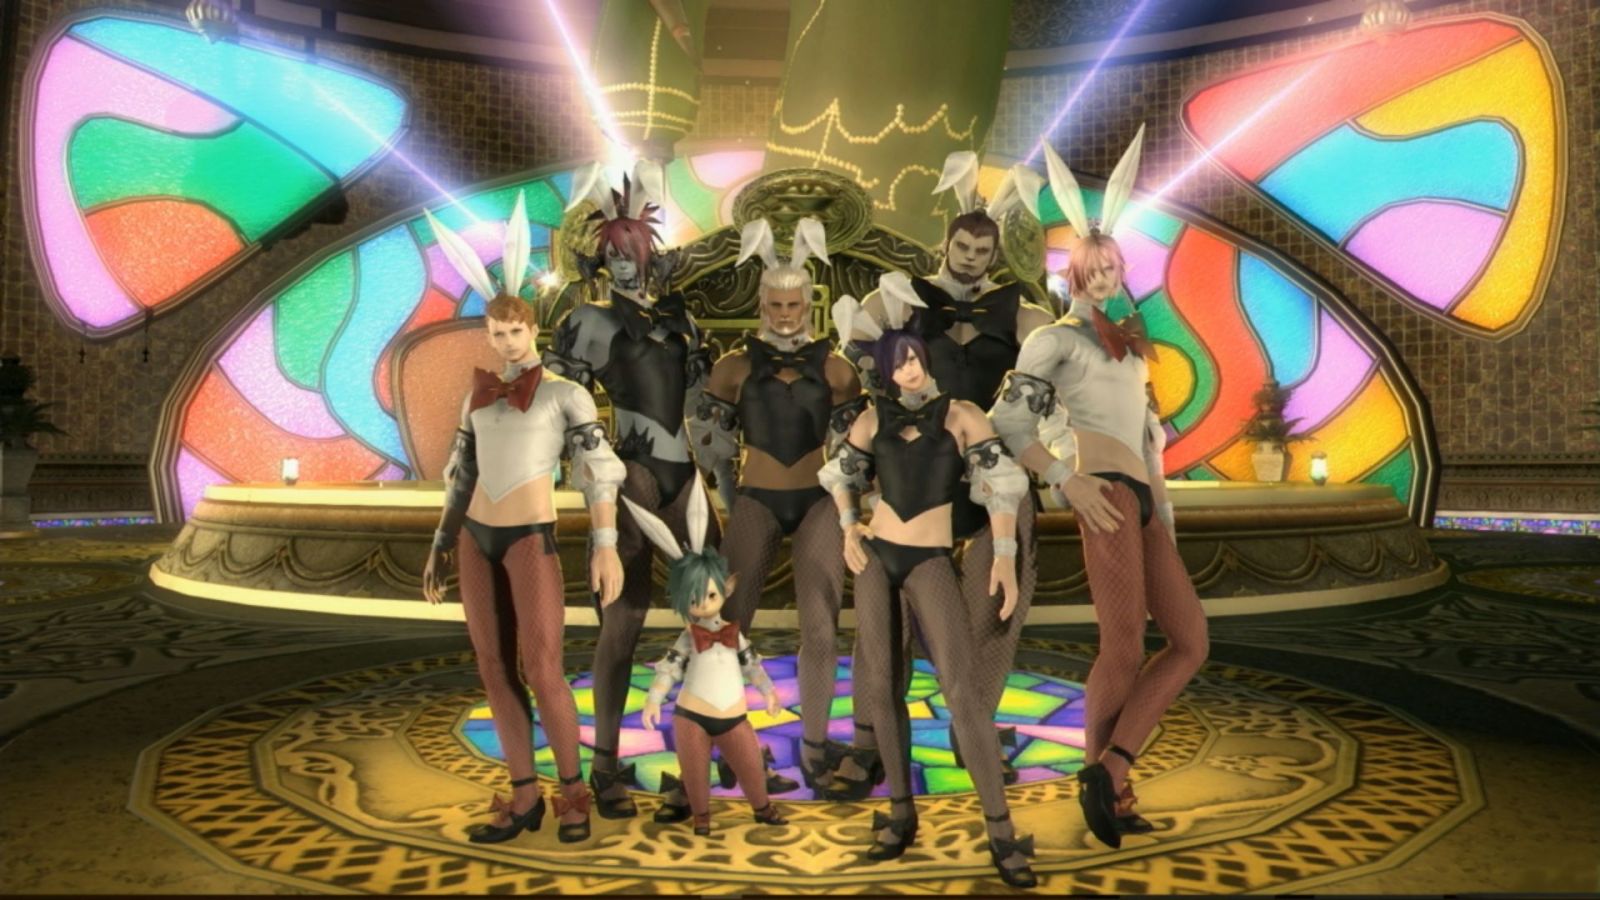 Final Fantasy XIV Introduces Bunny Outfits For Men.